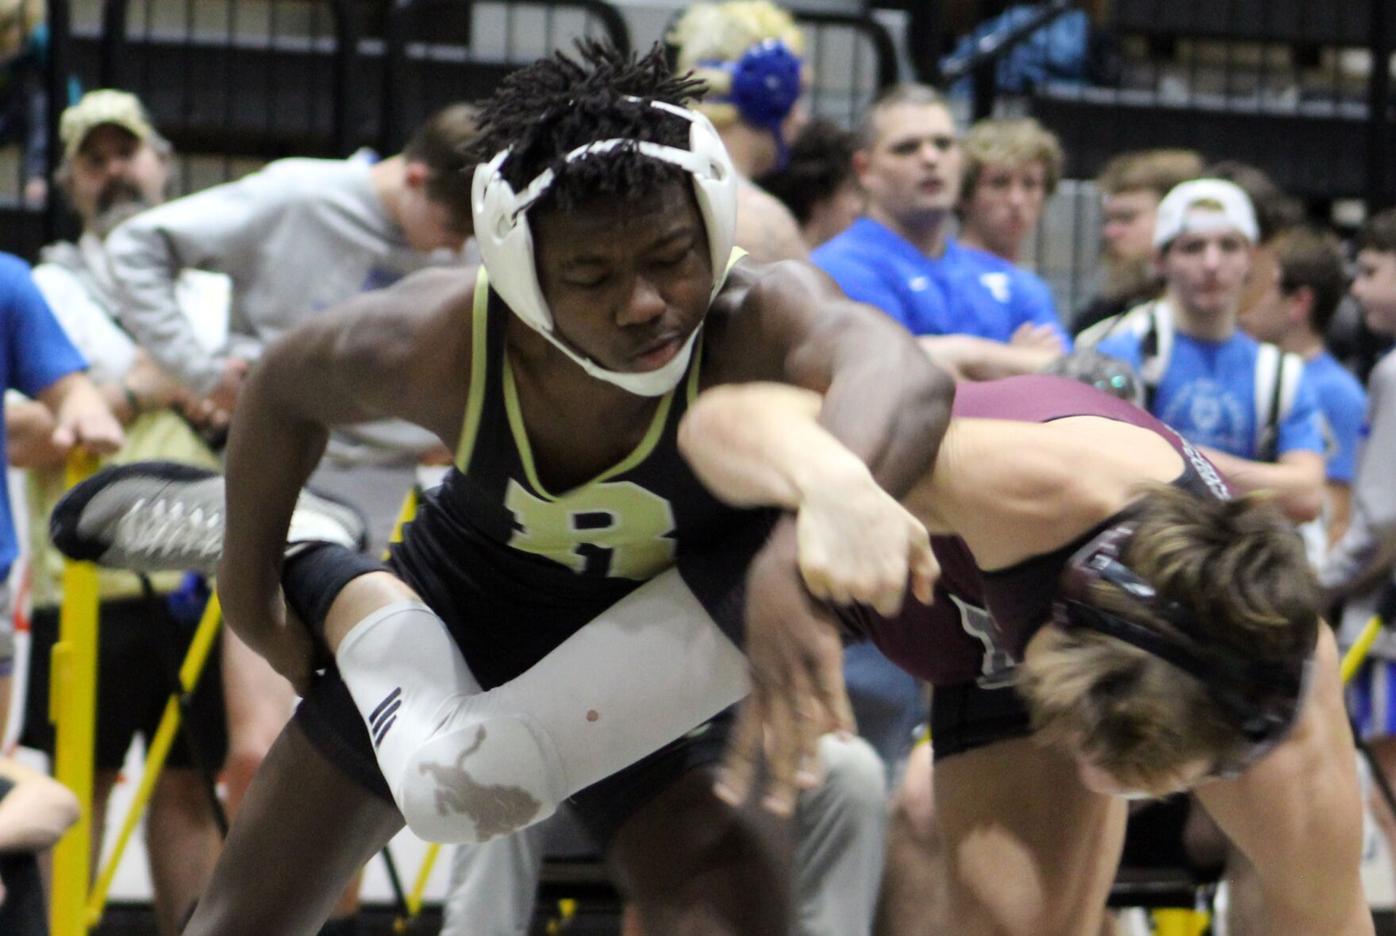 Rockmart finishes second at the 42nd Annual Jacket Invitational